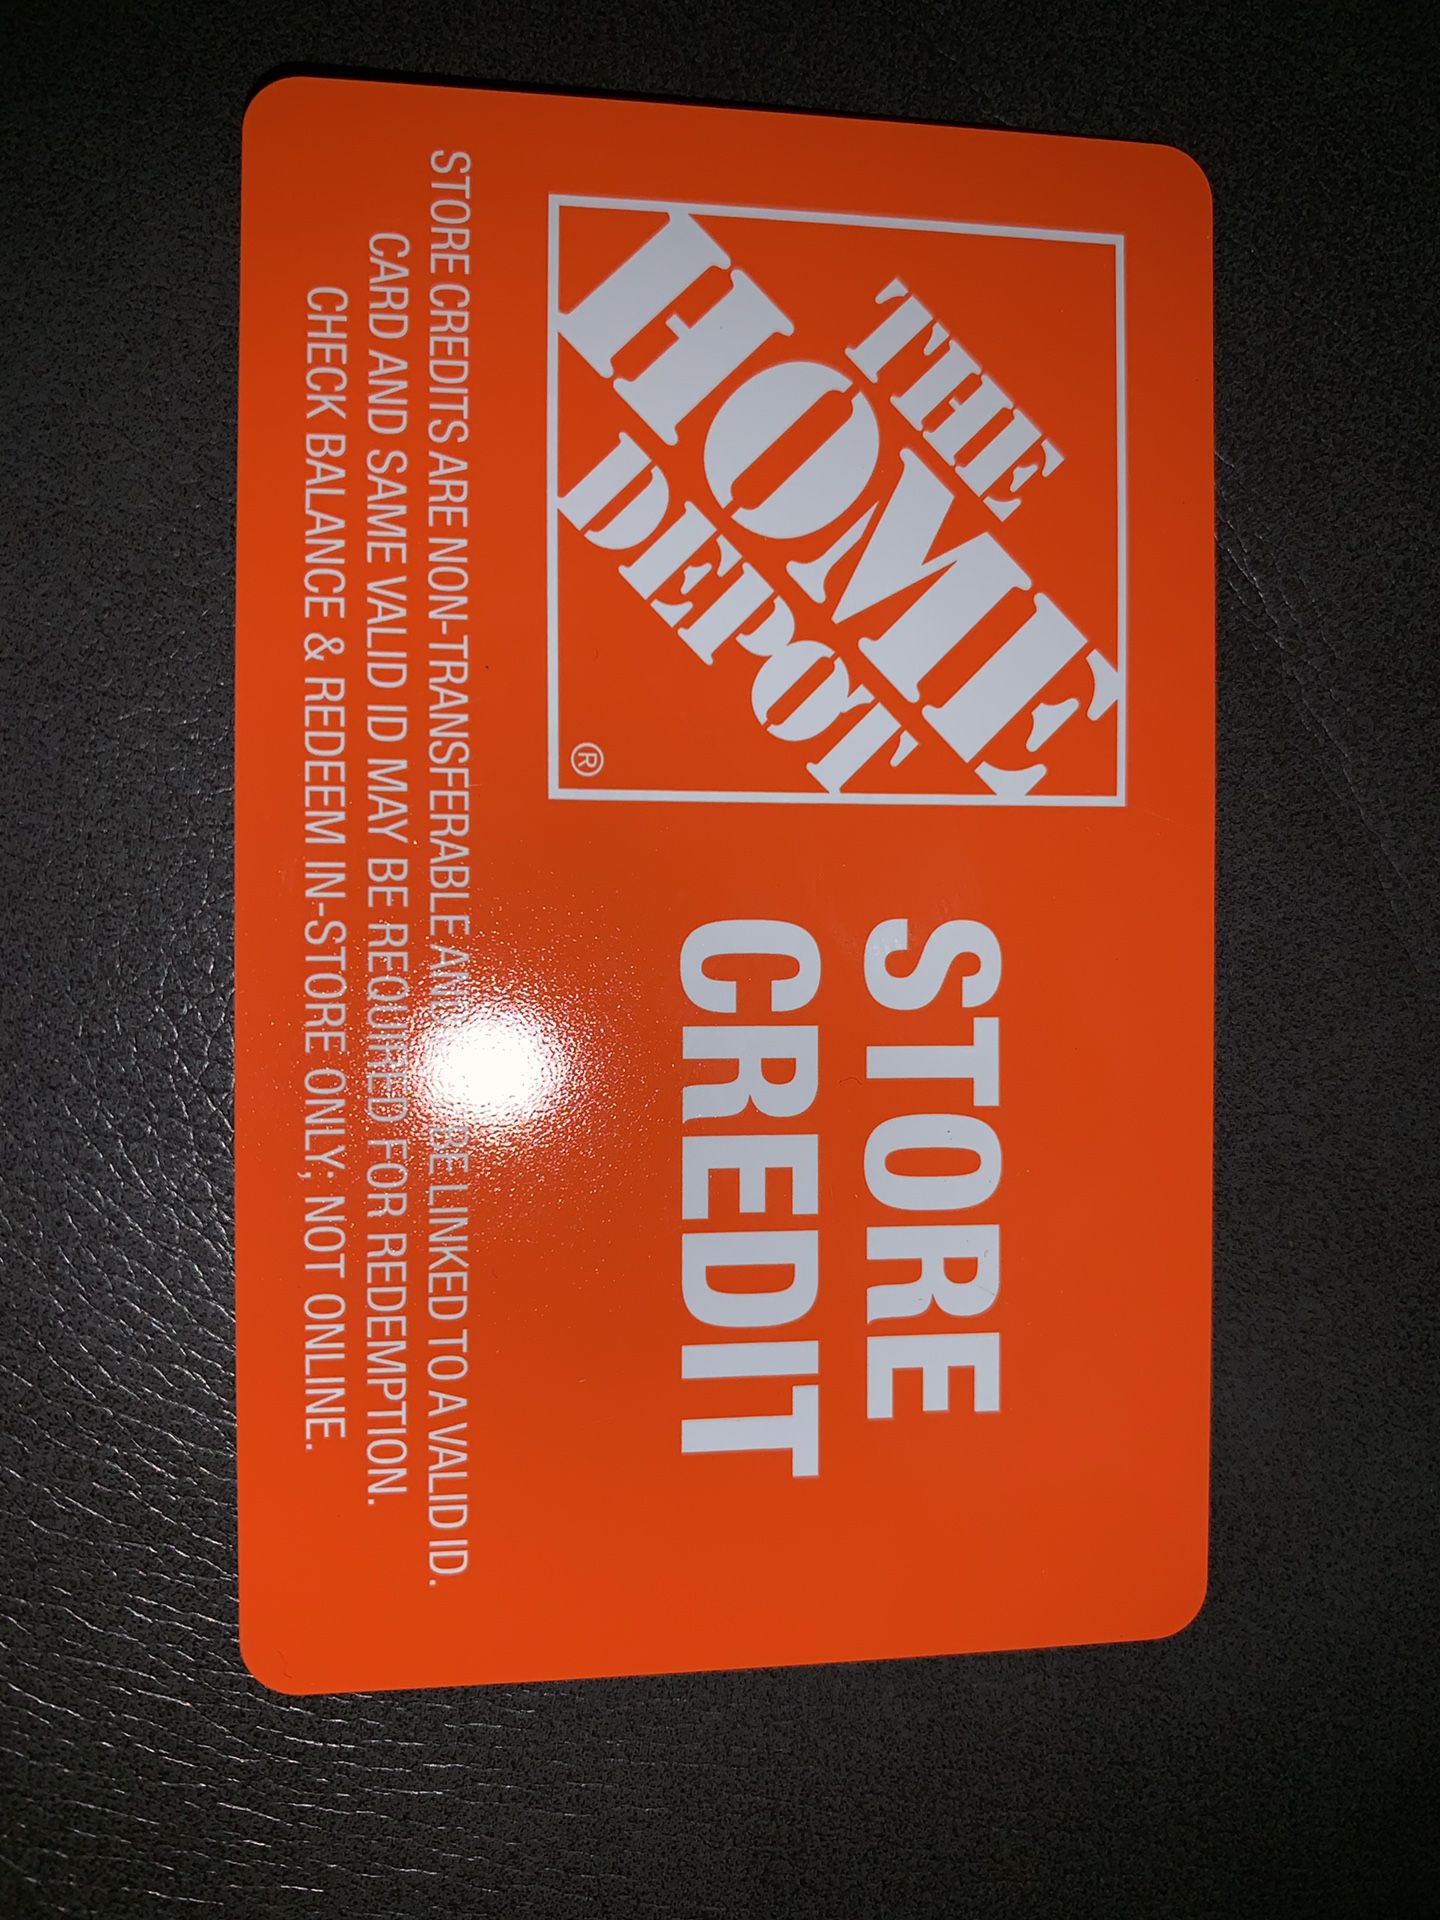 Home Depot store credit $459